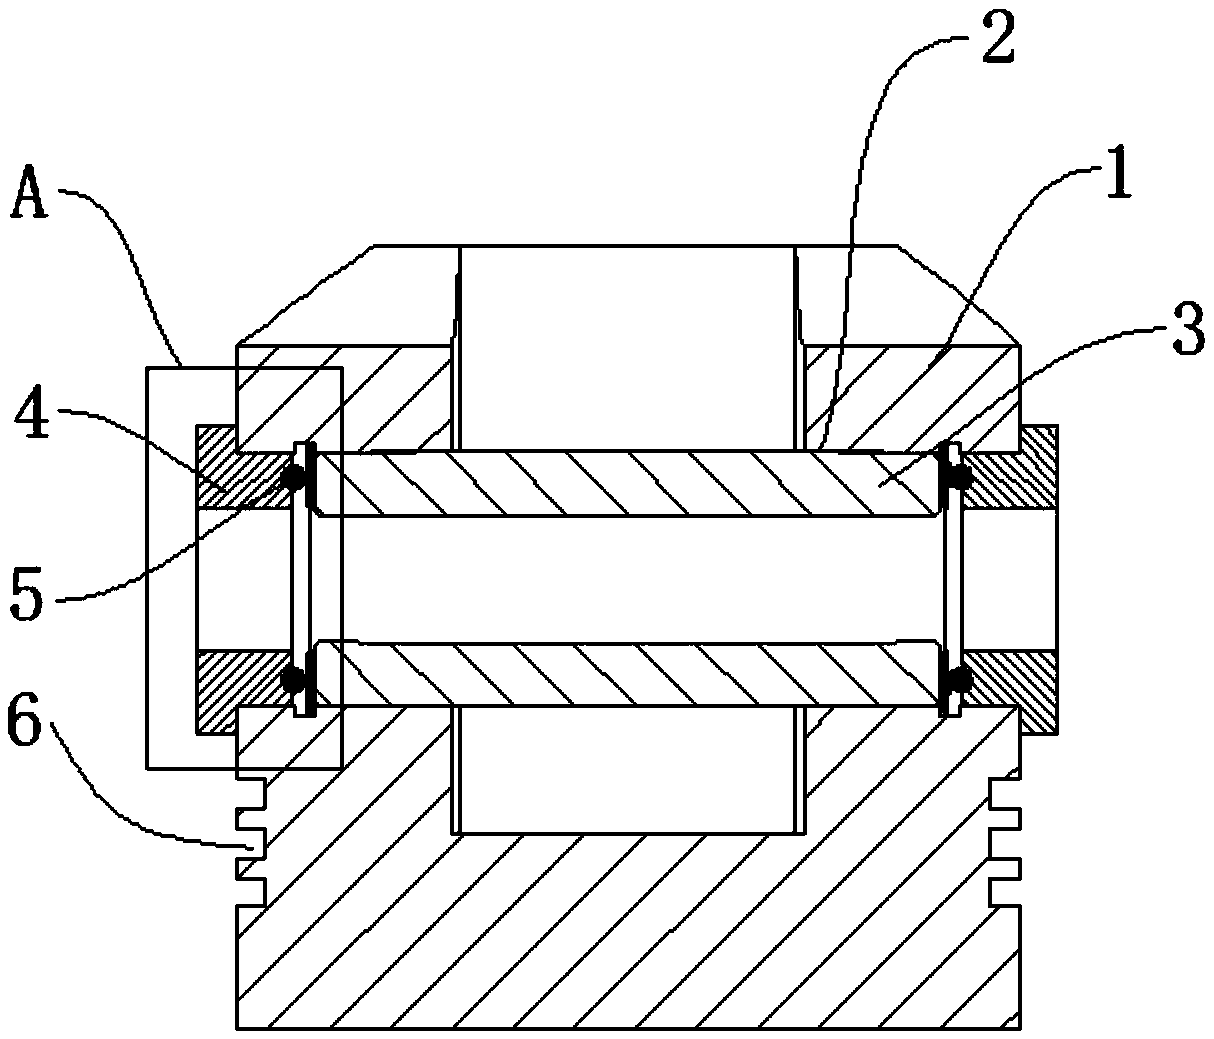 Graphene joint assembly for robot arm and assembly equipment of graphene joint assembly